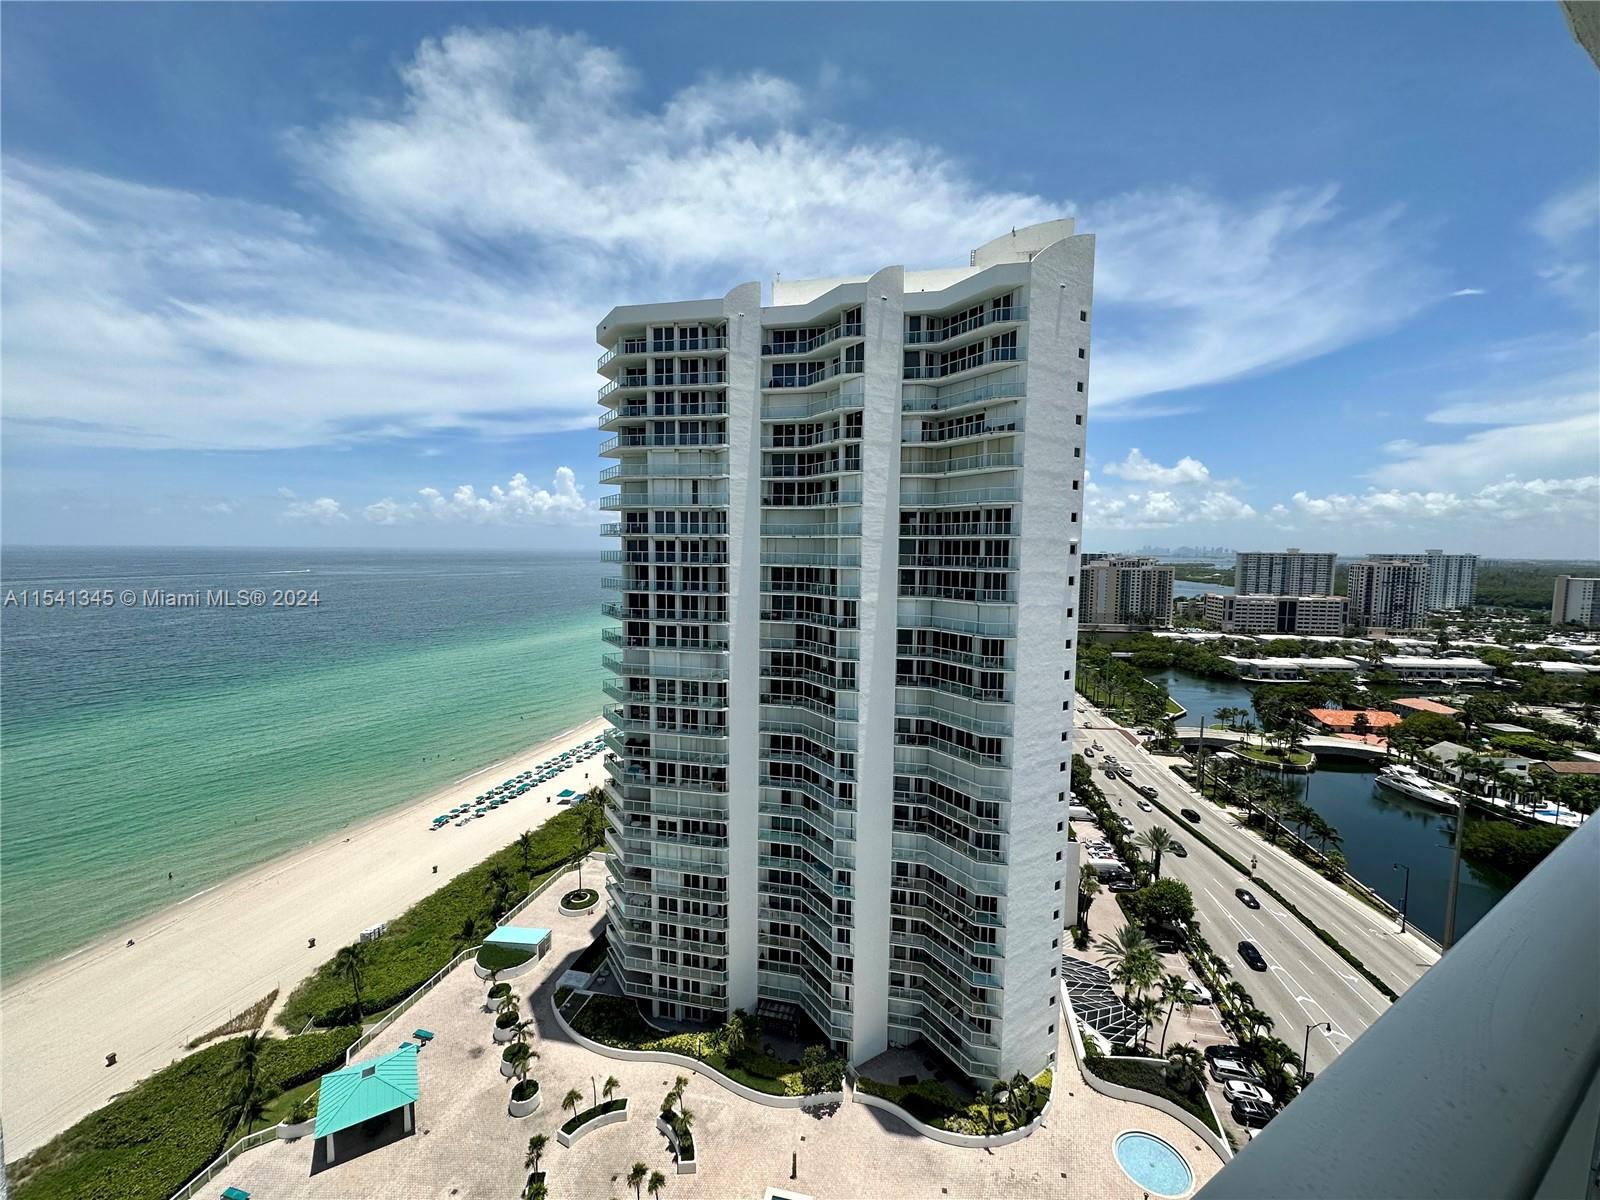 Live in a private enclave in the heart of Sunny Isles Beach!!! Beautiful Unit 2 Bed 2 Bath. In a highly desired Oceania Condo. Provides an abundance of space to live, entertain, relax and play. Spacious apartment with one of the best views in the building. Amazing ocean view! Living, Family, and a stunning Kitchen. New Appliances, Striking Bathrooms, closets and floors. Bright and Modern. By far, one of the best units in the Condo! The building has many amenities including a Restaurant, Gym, Fitness center, Pool, Sauna, Full Service Private Beach Club, Beauty Salon, Spa, Tennis Courts, Marina and more. 24-hour guard gated community. This home is sure to be at the top of your list, what other reasons will make you fall in love with this magnificent unit? Schedule your private showing today.